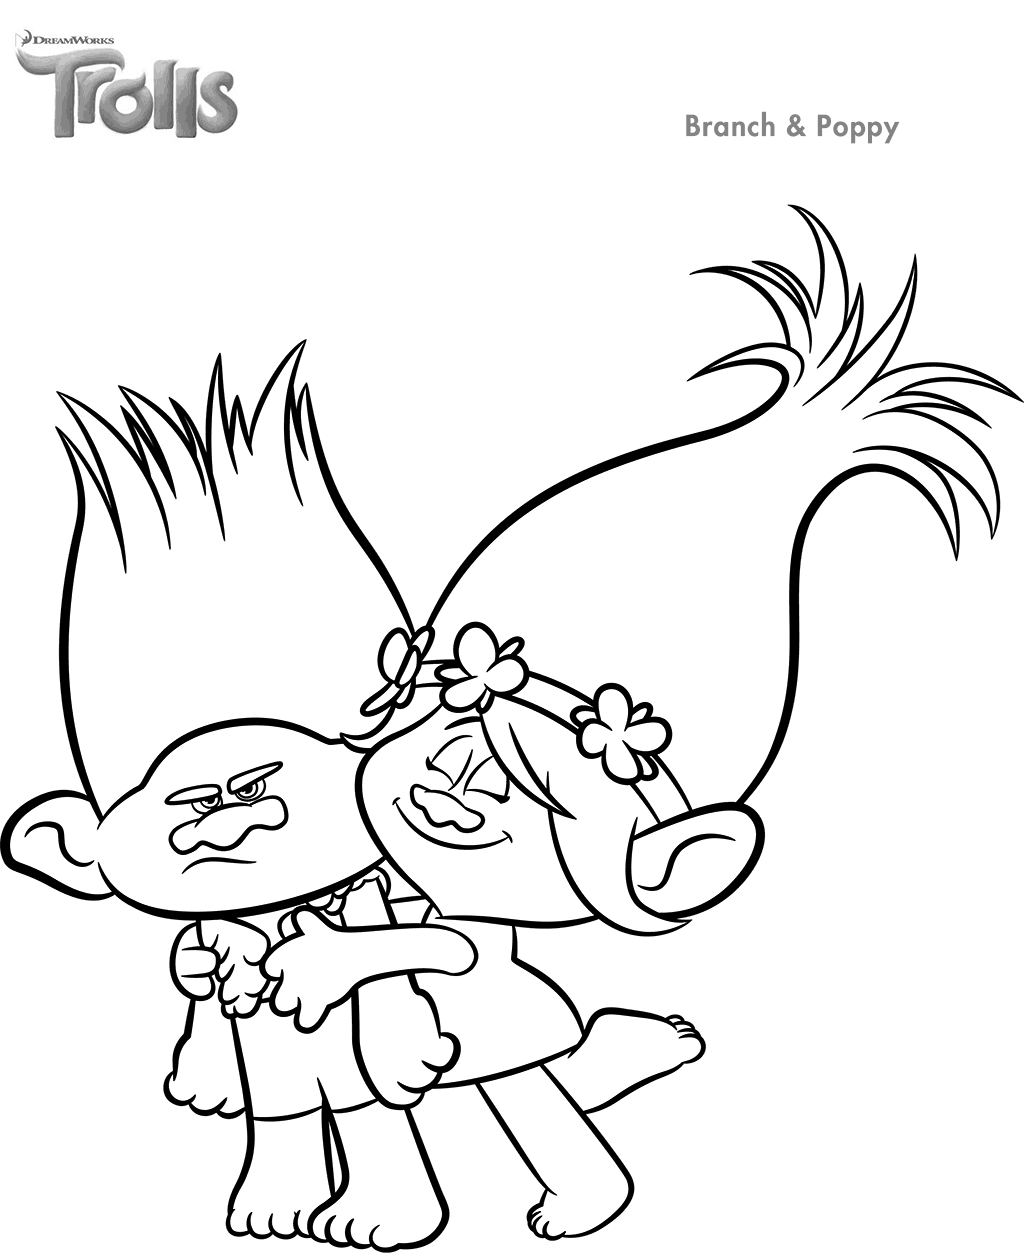 880 Coloring Pages Disney Trolls Images & Pictures In HD